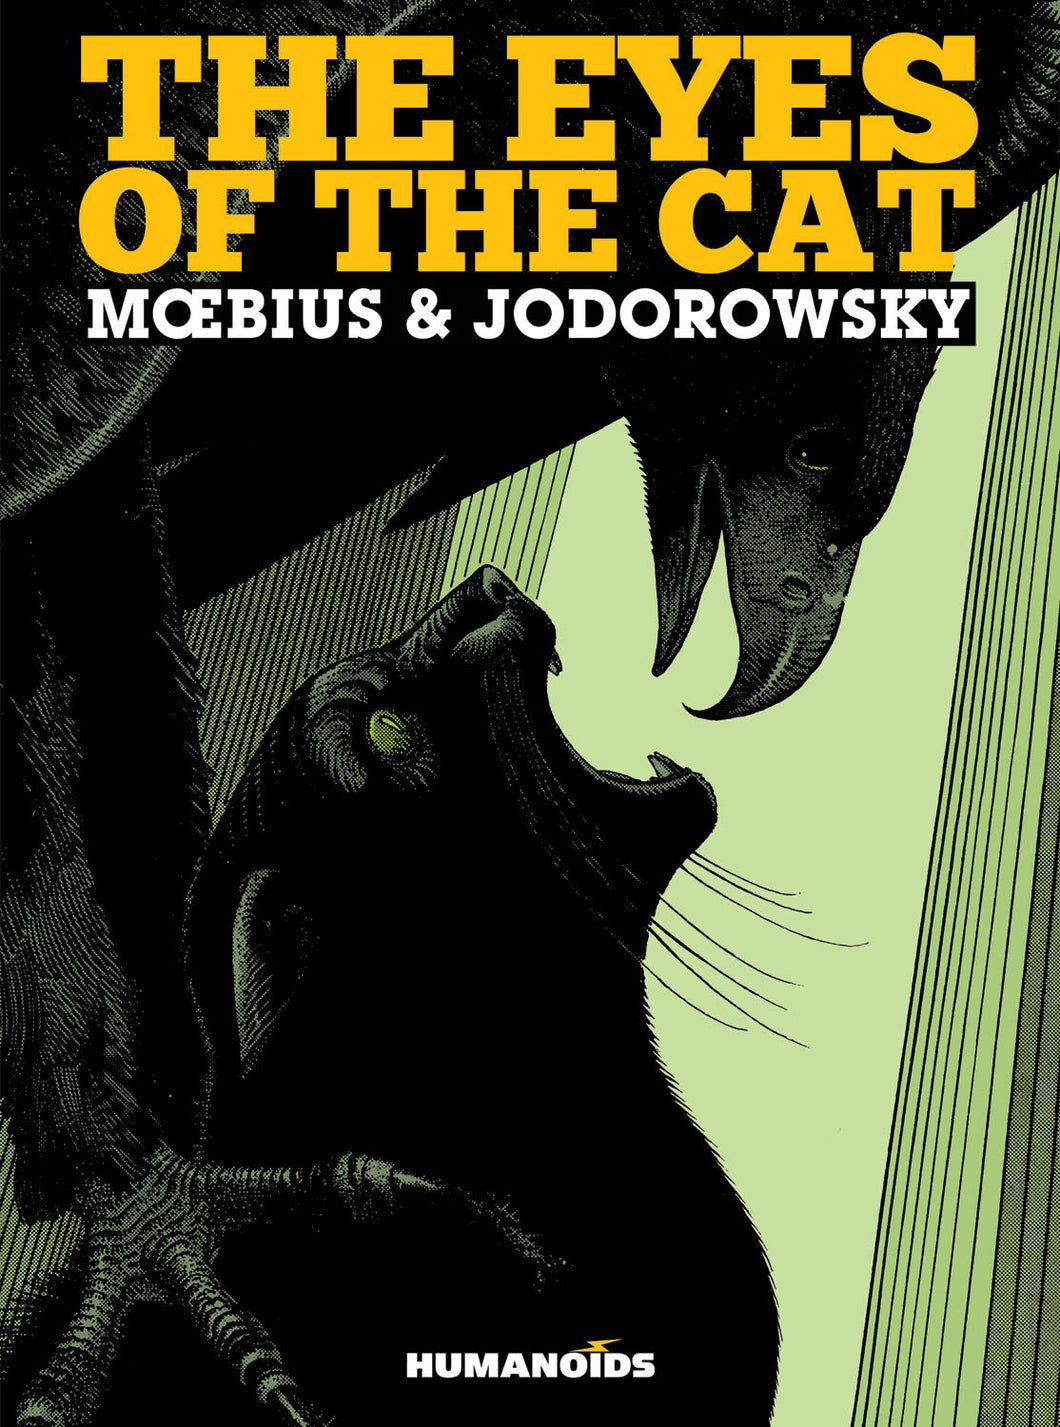 The Eyes of the Cat by Alejandro Jodorowsky and Moebius